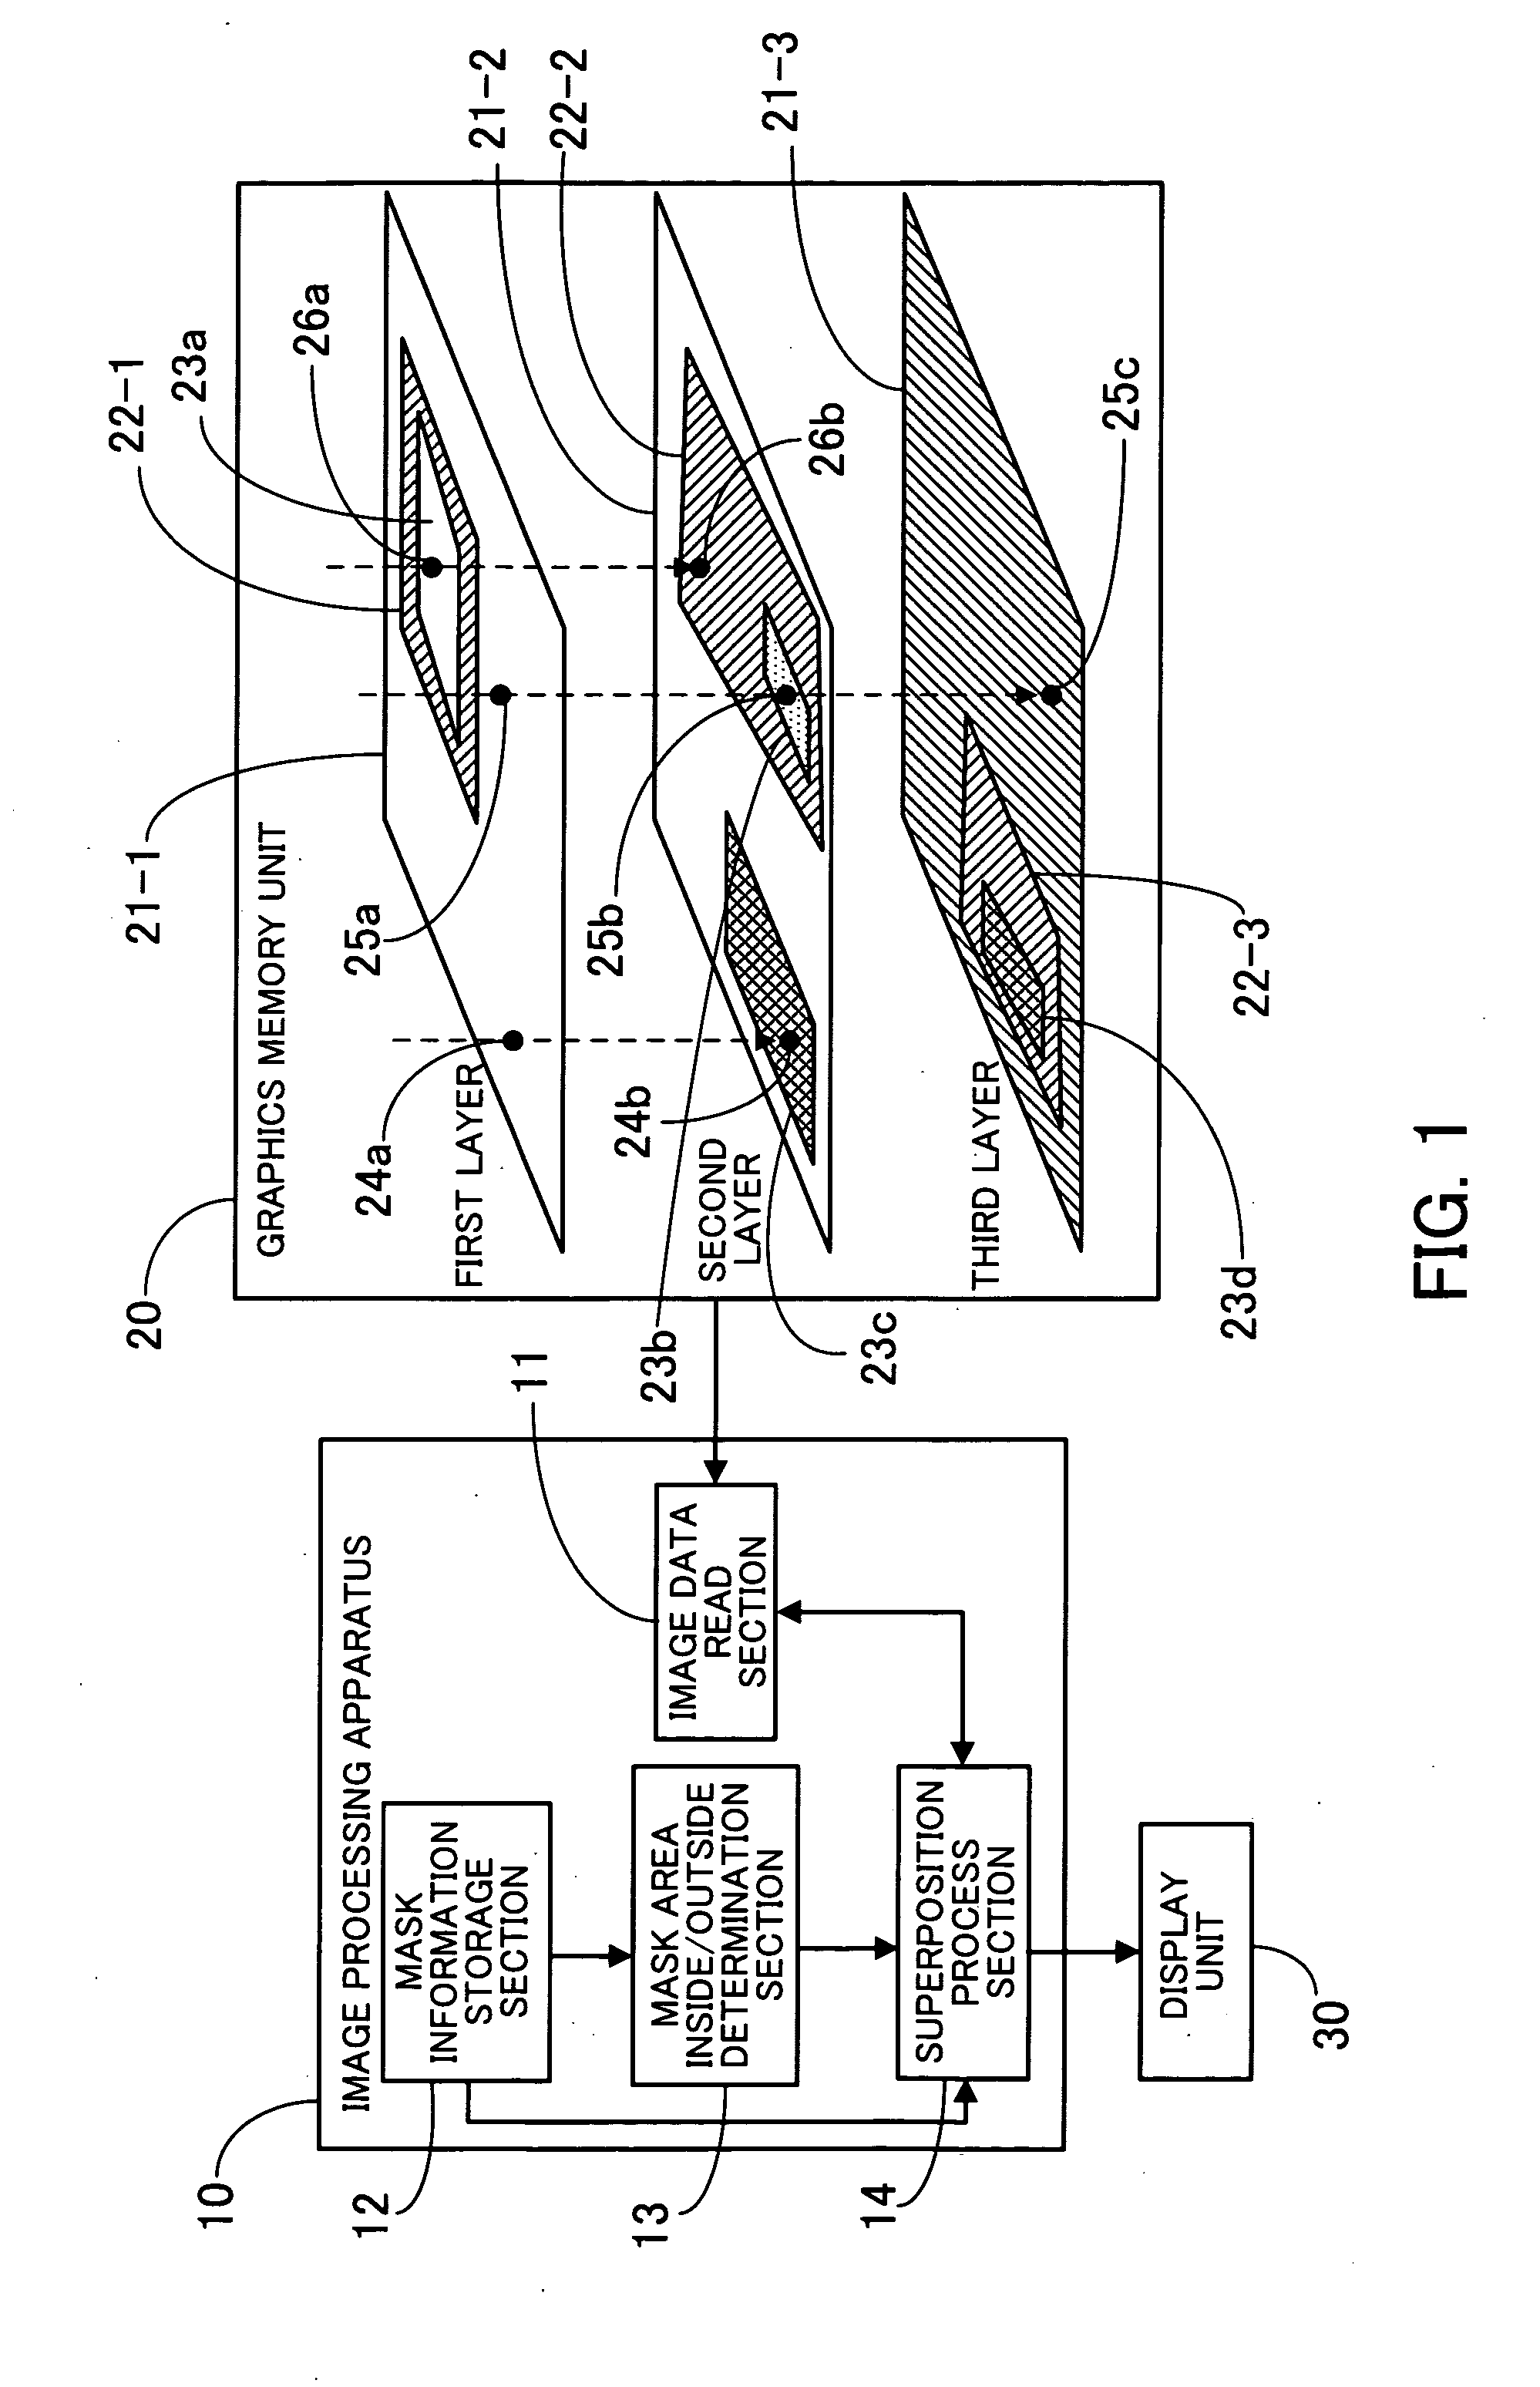 Image processing apparatus and graphics memory unit